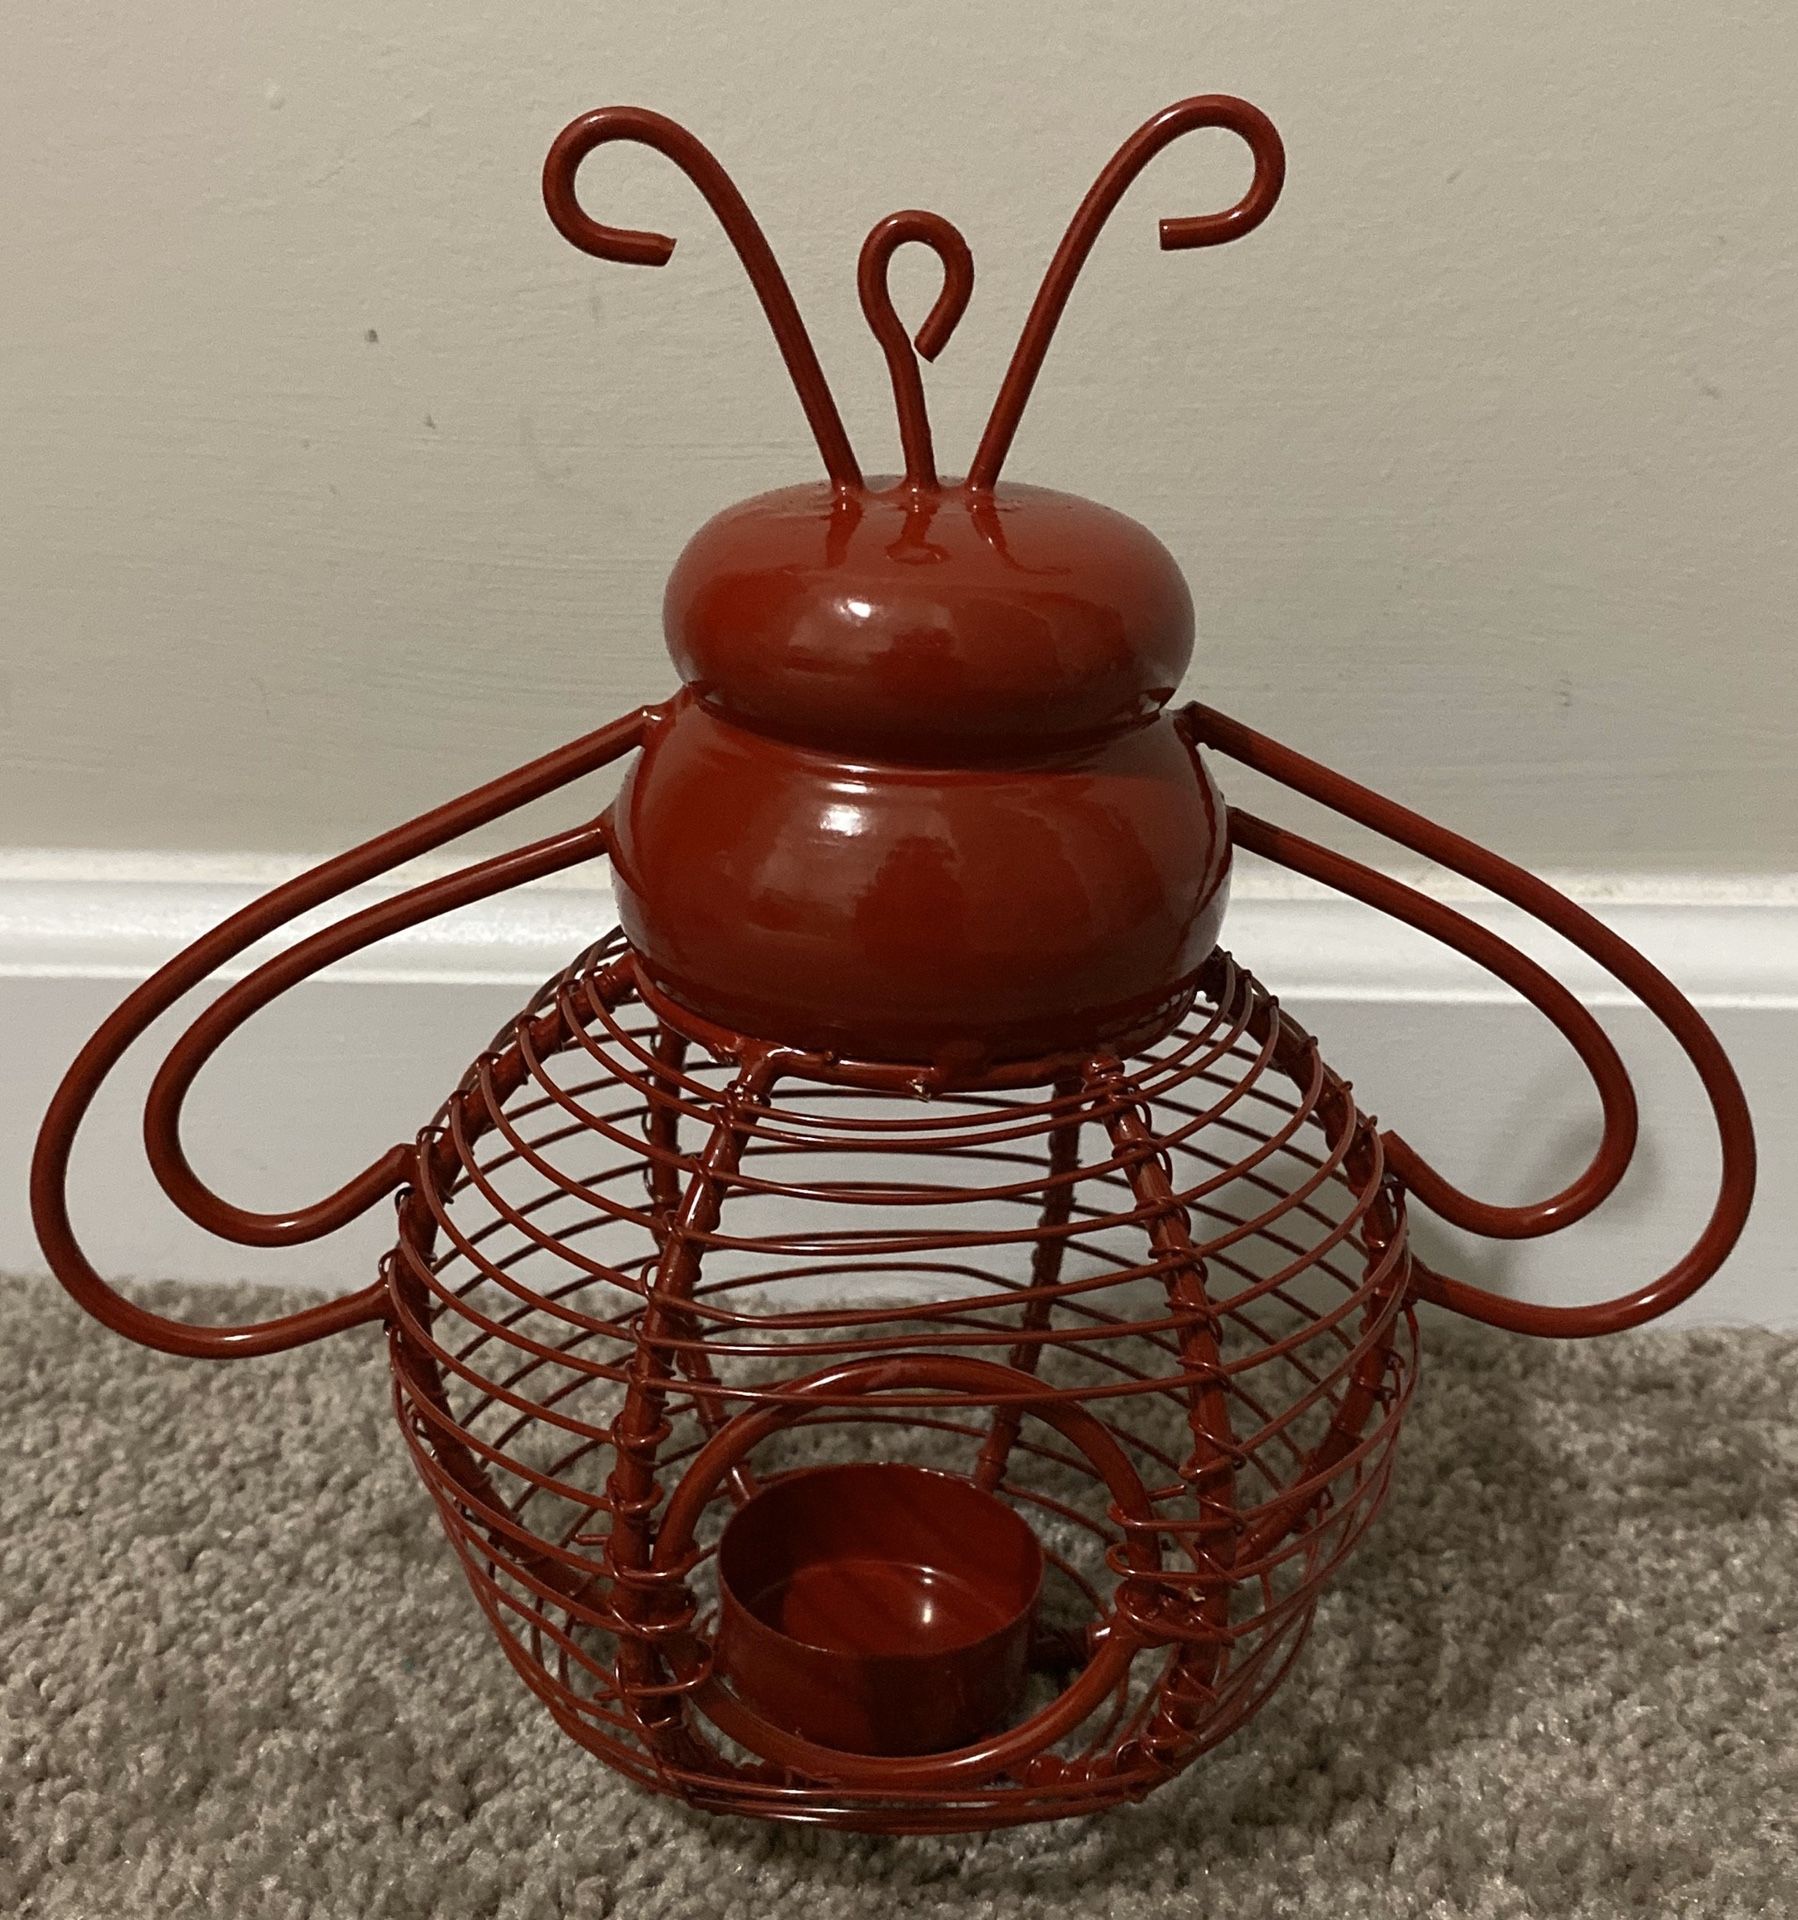 RED METAL BUMBLE BEE GARDEN OUTDOOR CANDLE HOLDER HOME DECOR ACCENT